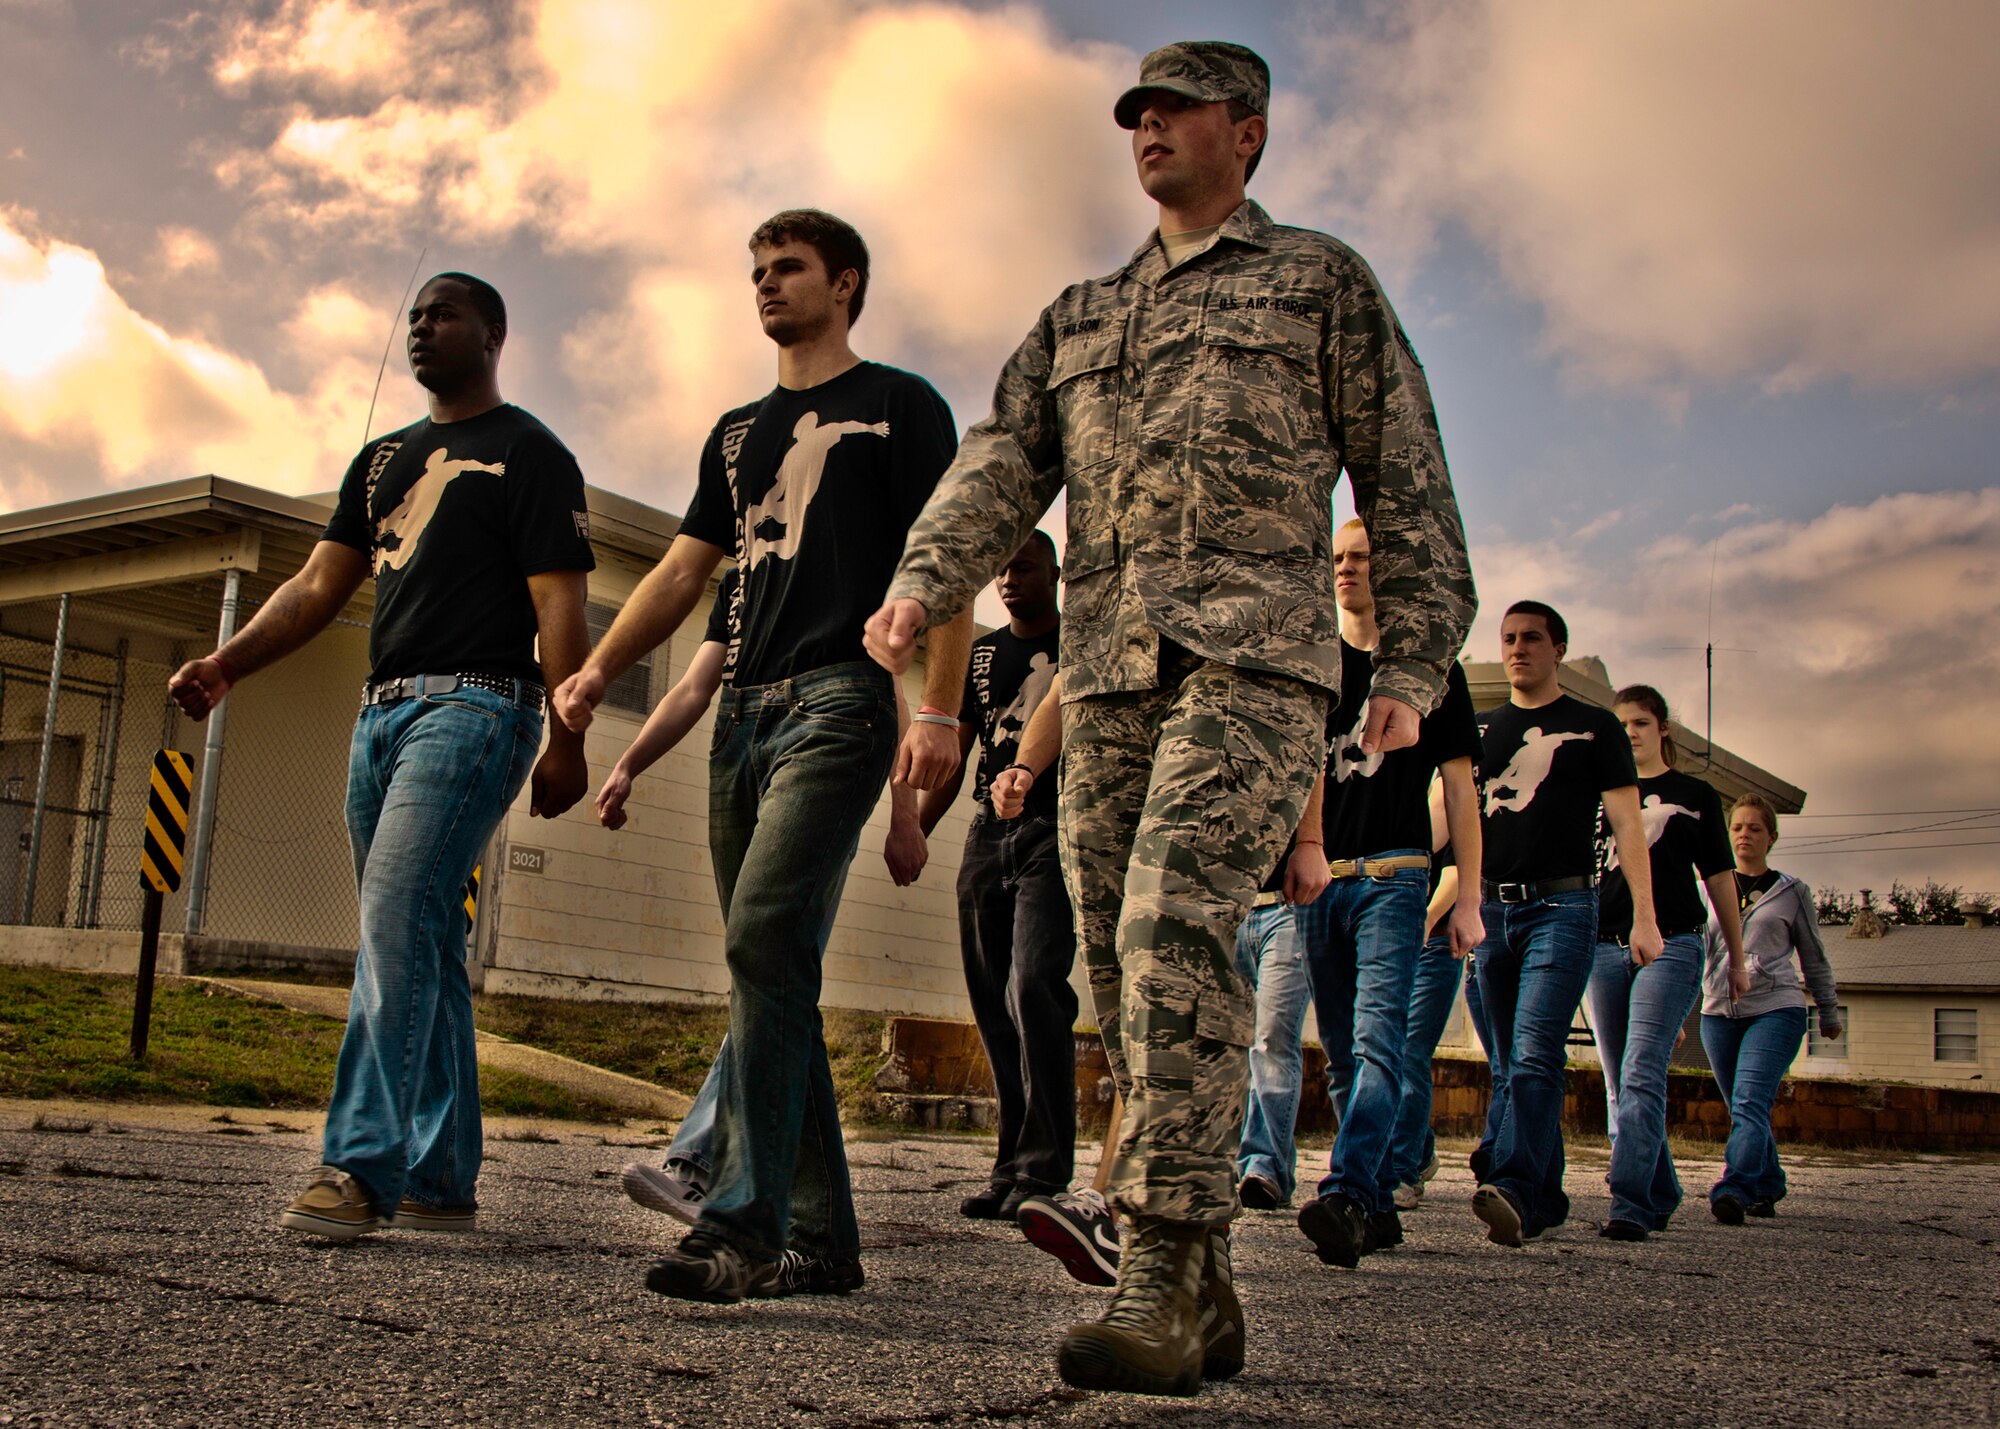 Airman 1st Class John Wilson, of the 919th Special Operations Wing, marches with the new Air Force Reserve recruits, who are learning to drill at Duke Field, Fla., Feb. 5.  This six-month-old introductory training is a new Air Force Reserve Command program to help recruits prepare for military life prior to going to basic military training.  (U.S. Air Force photo/Tech. Sgt. Samuel King Jr.)